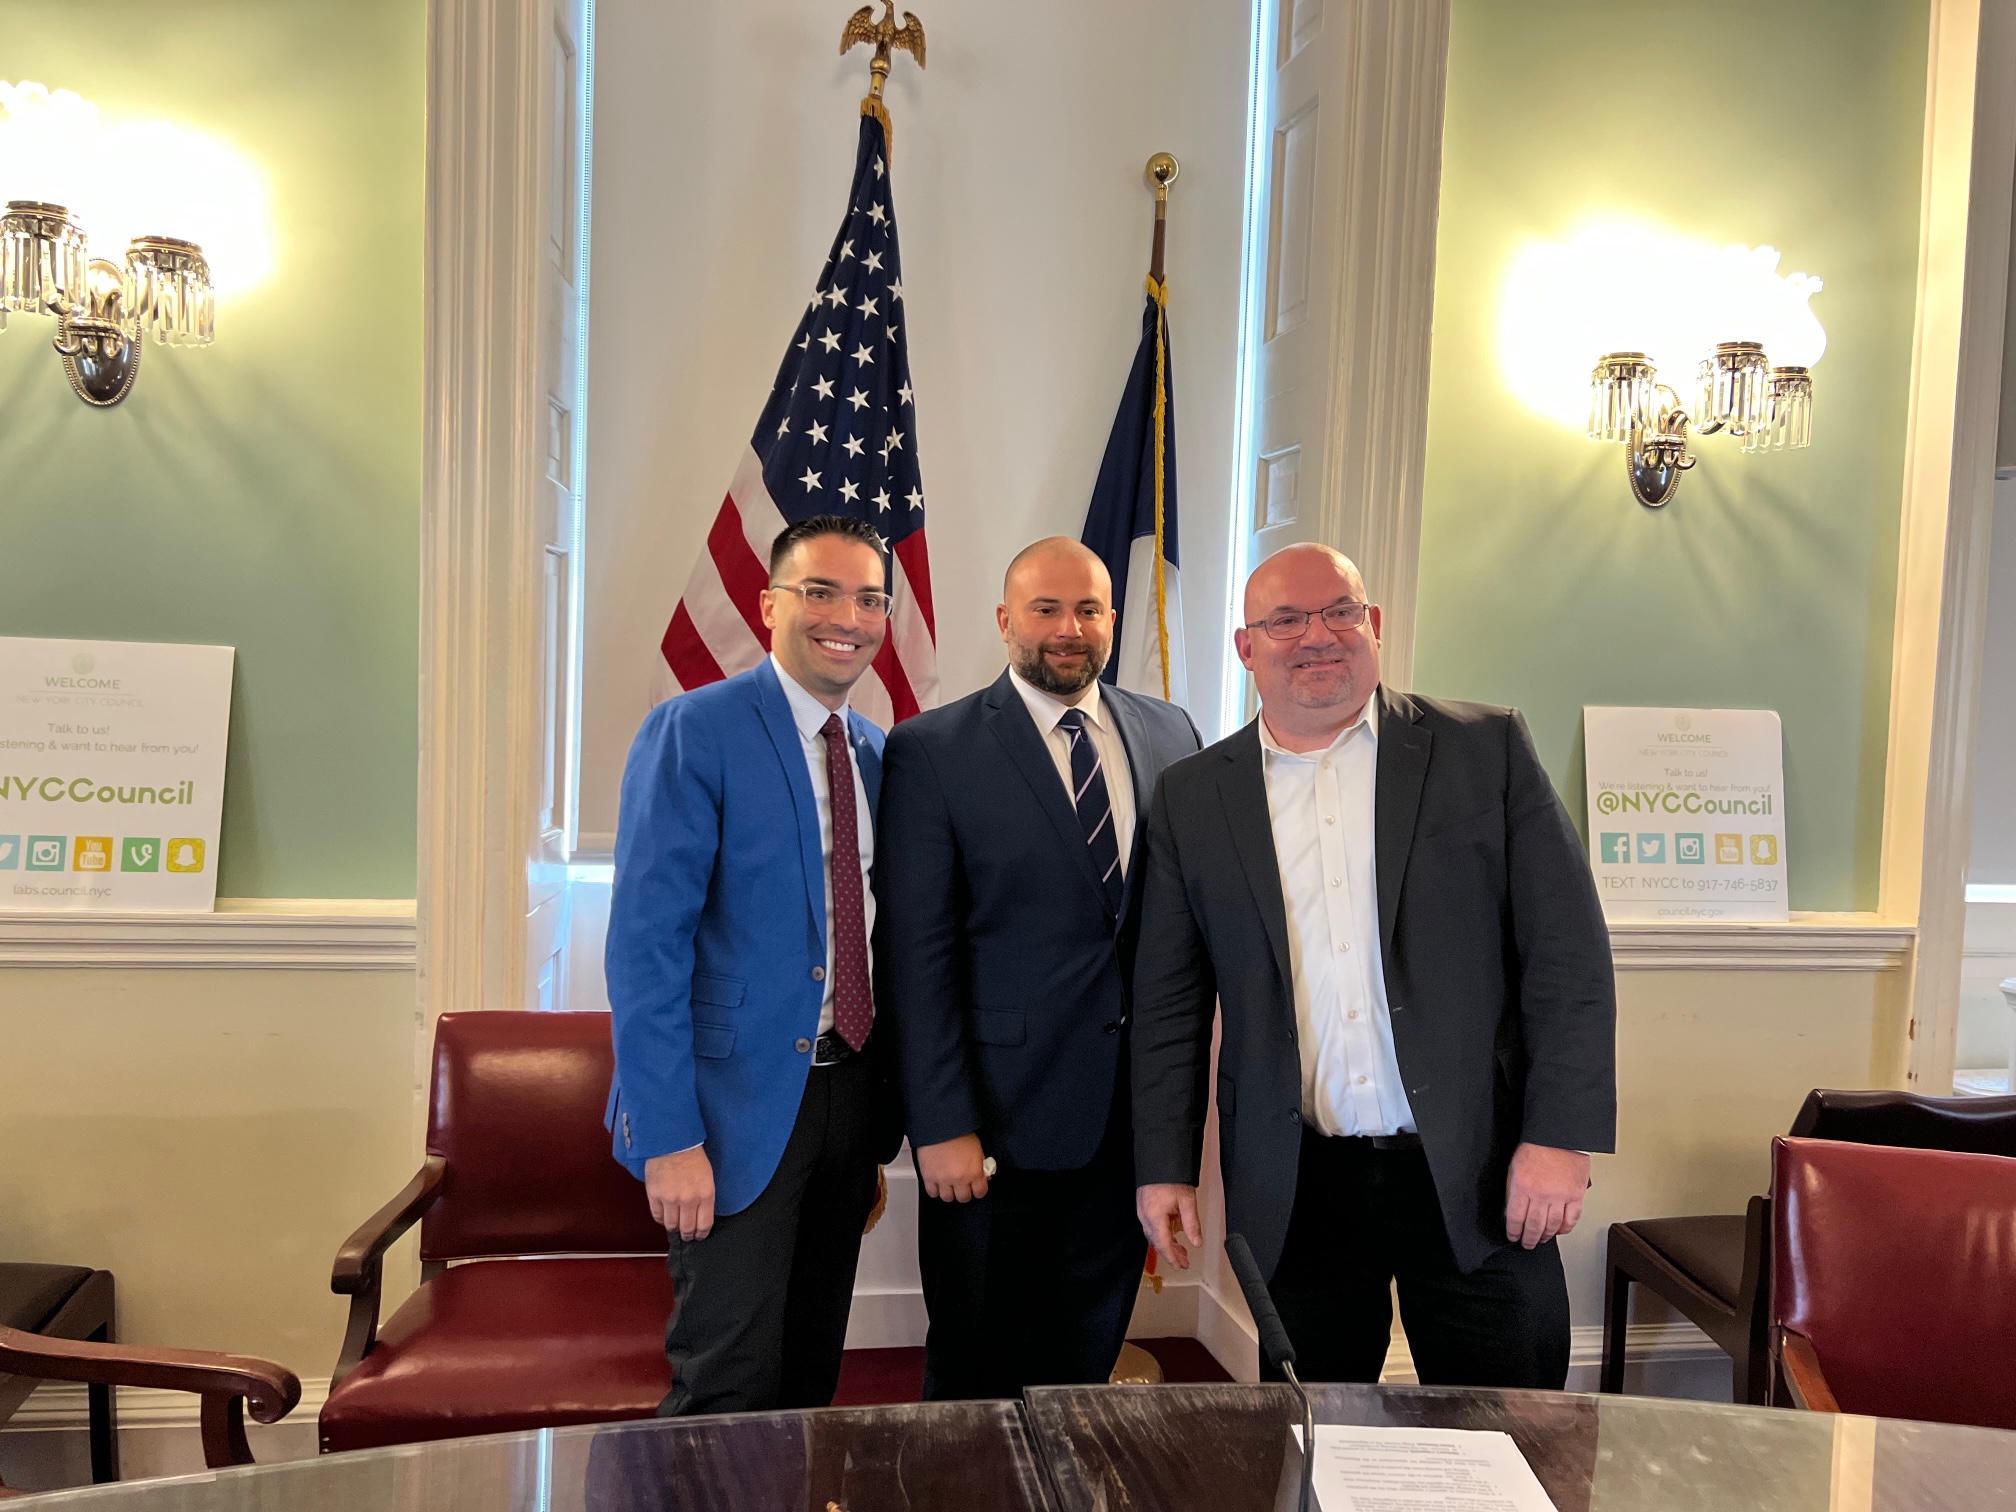 REPUBLICAN DELEGATION ELECTS JOE BORELLI AS MINORITY LEADER OF THE NEW YORK CITY COUNCIL